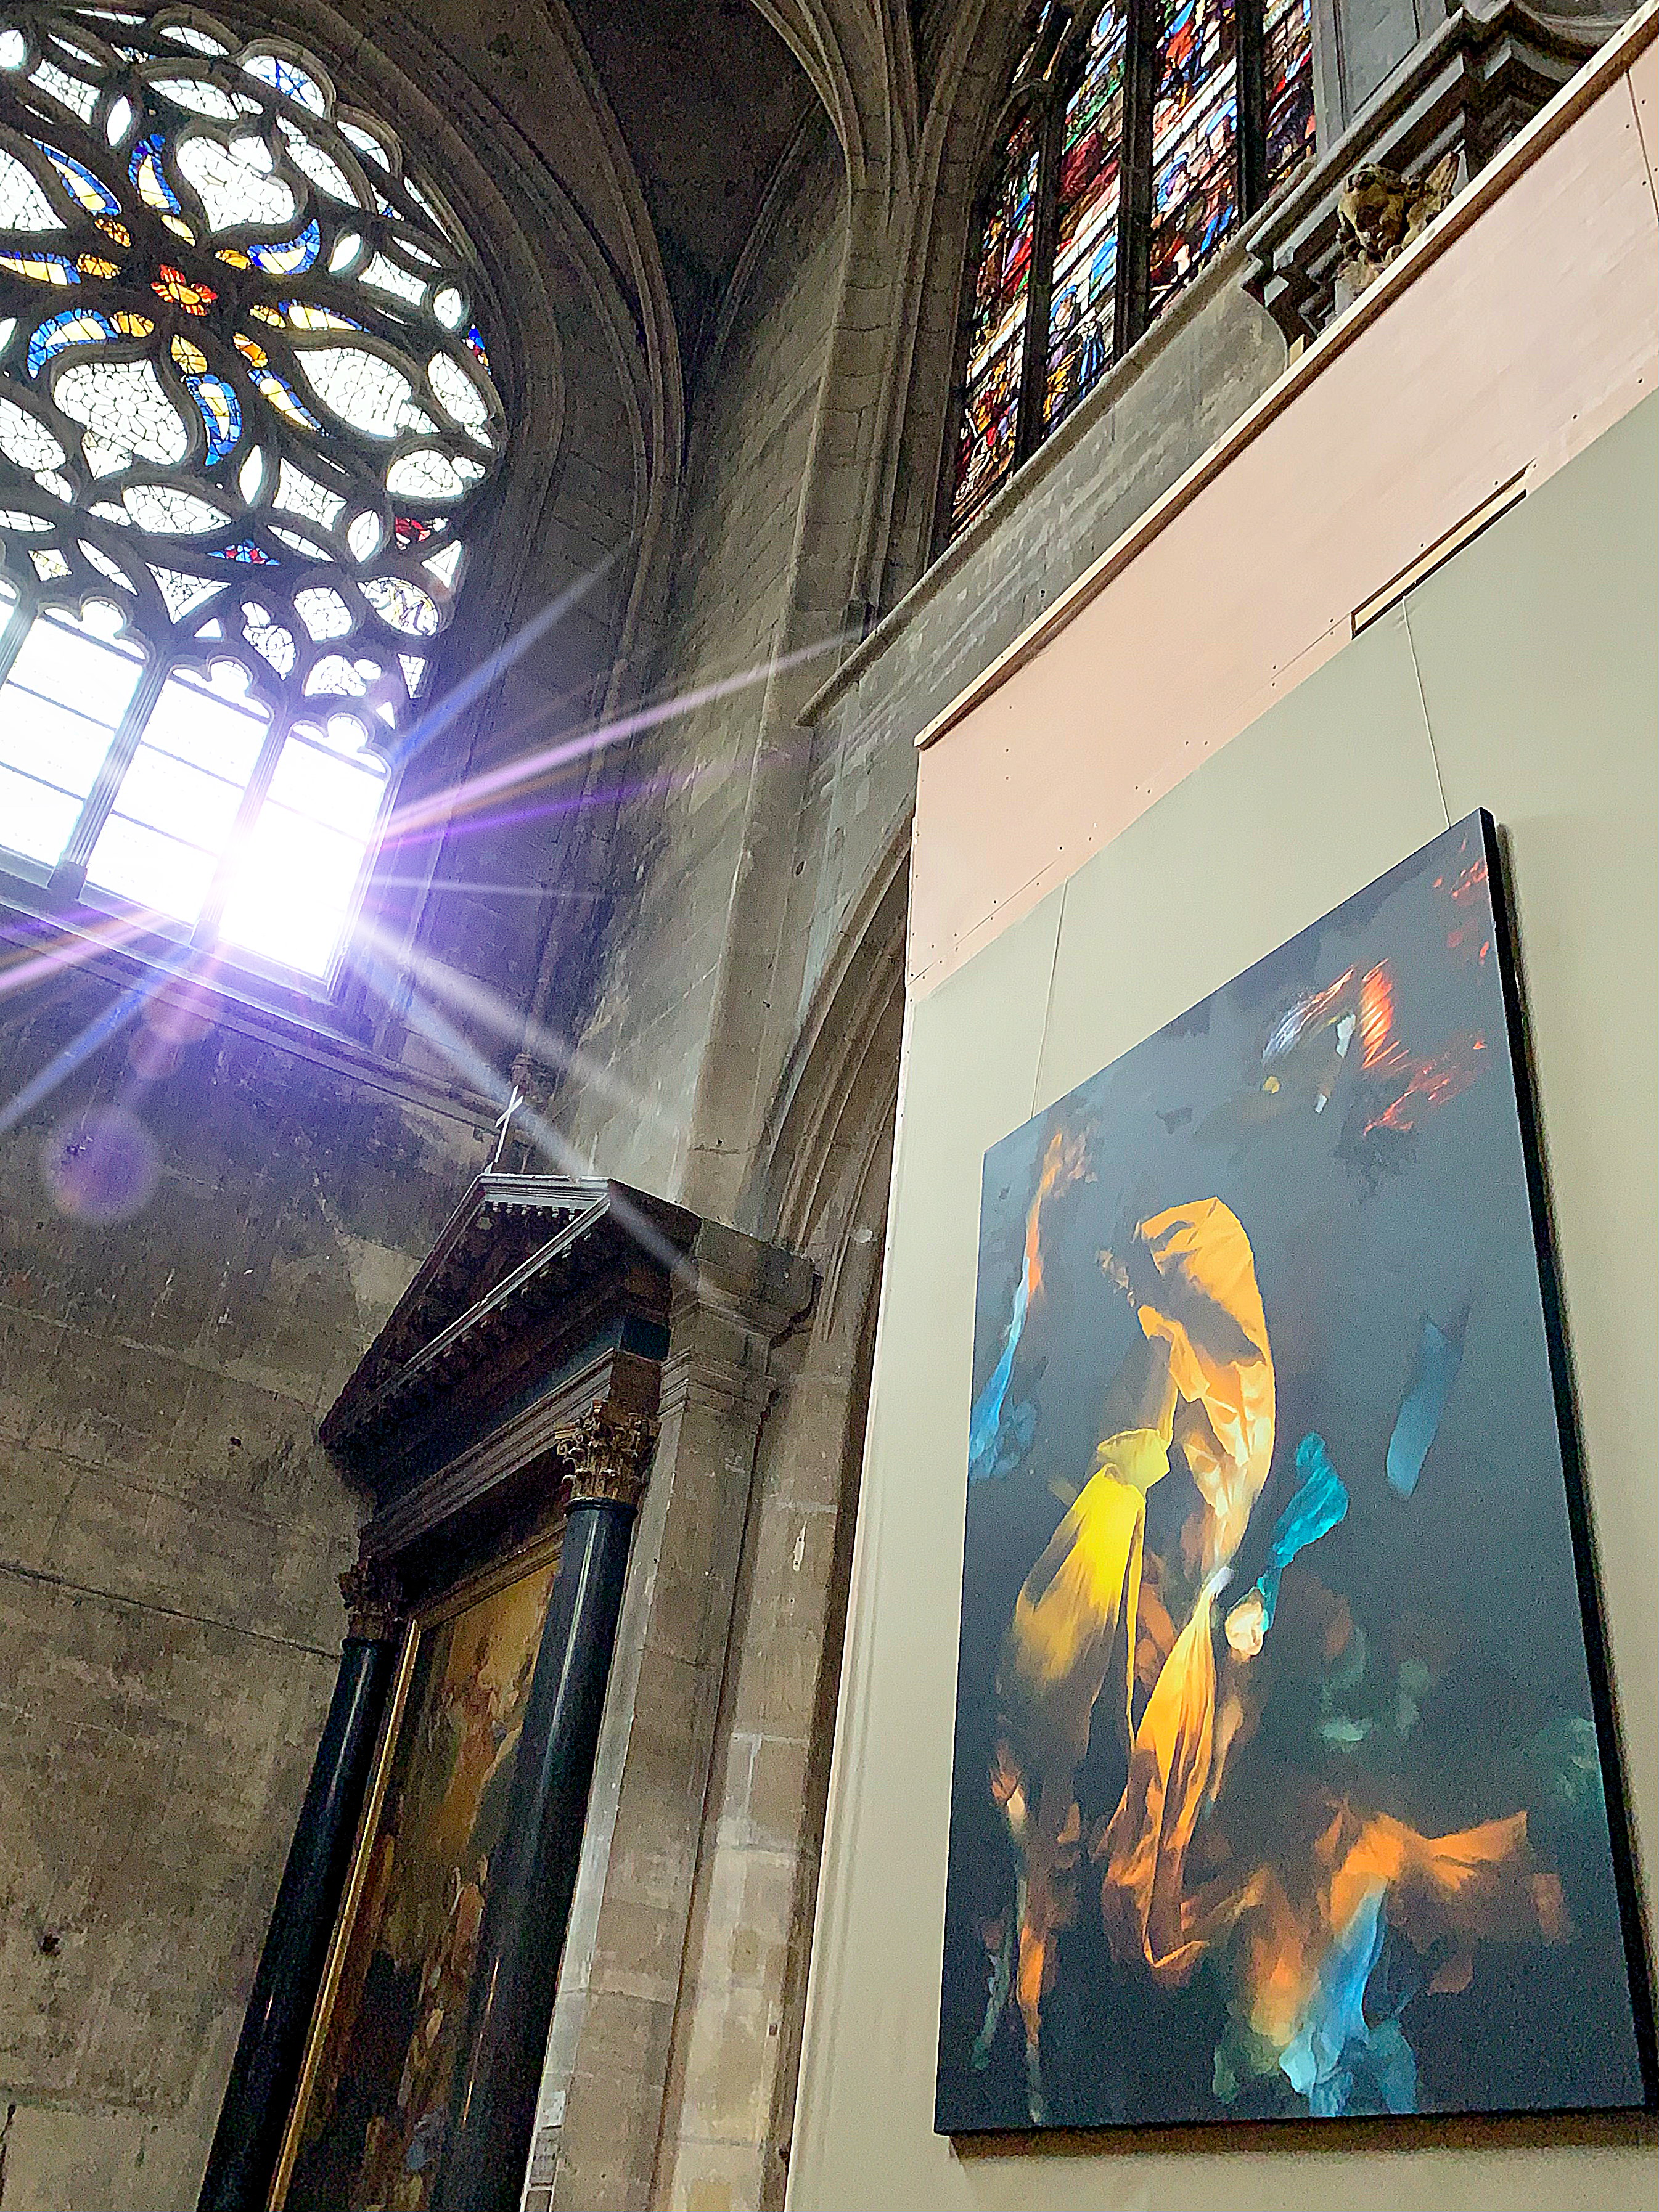 Christy Lee Rogers at The Saint Merry Church, Paris